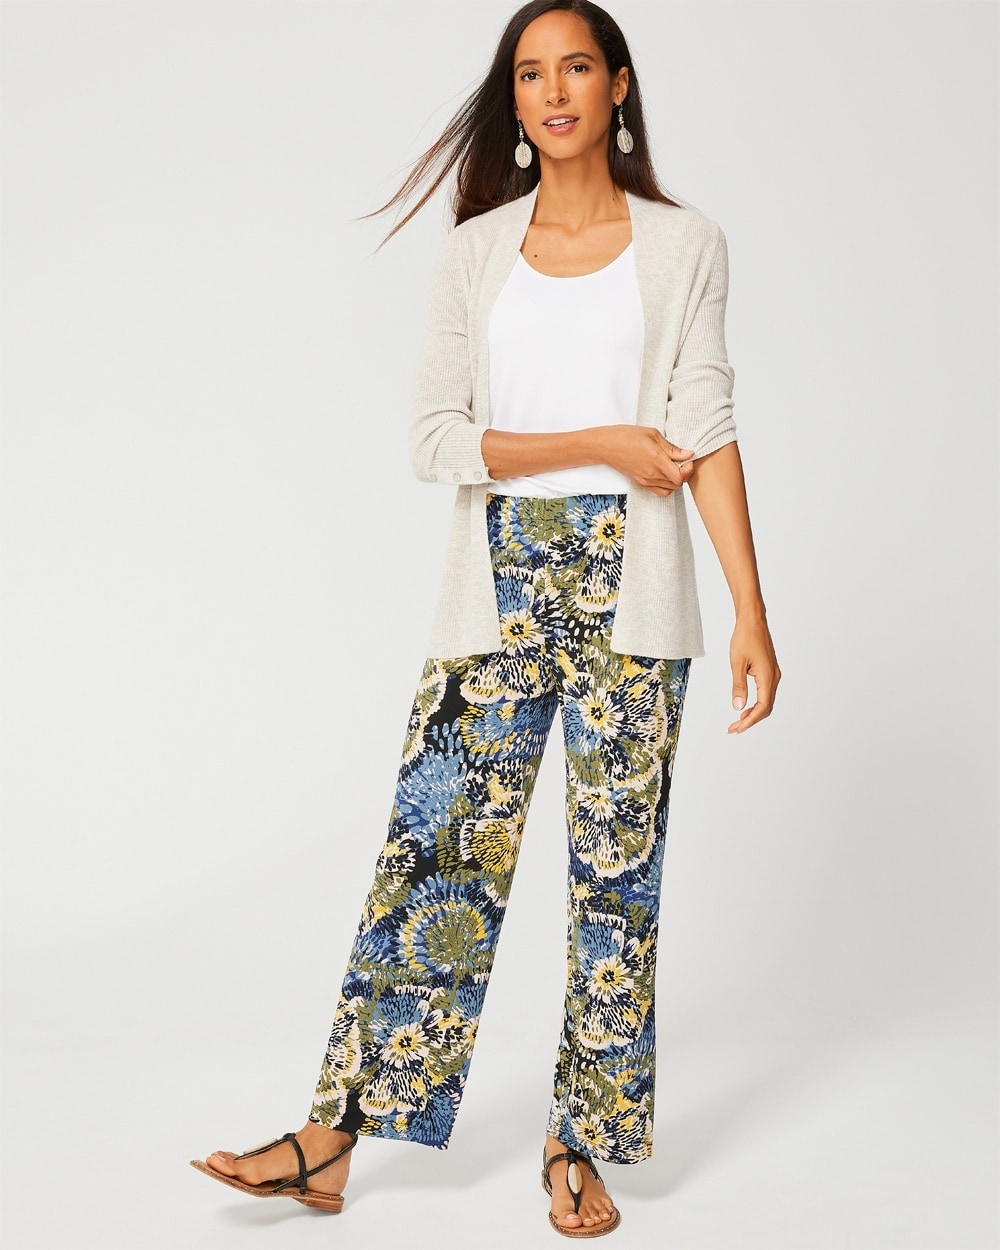 Floral Drops Palazzo Pants - Chico's Off The Rack - Chico's Outlet